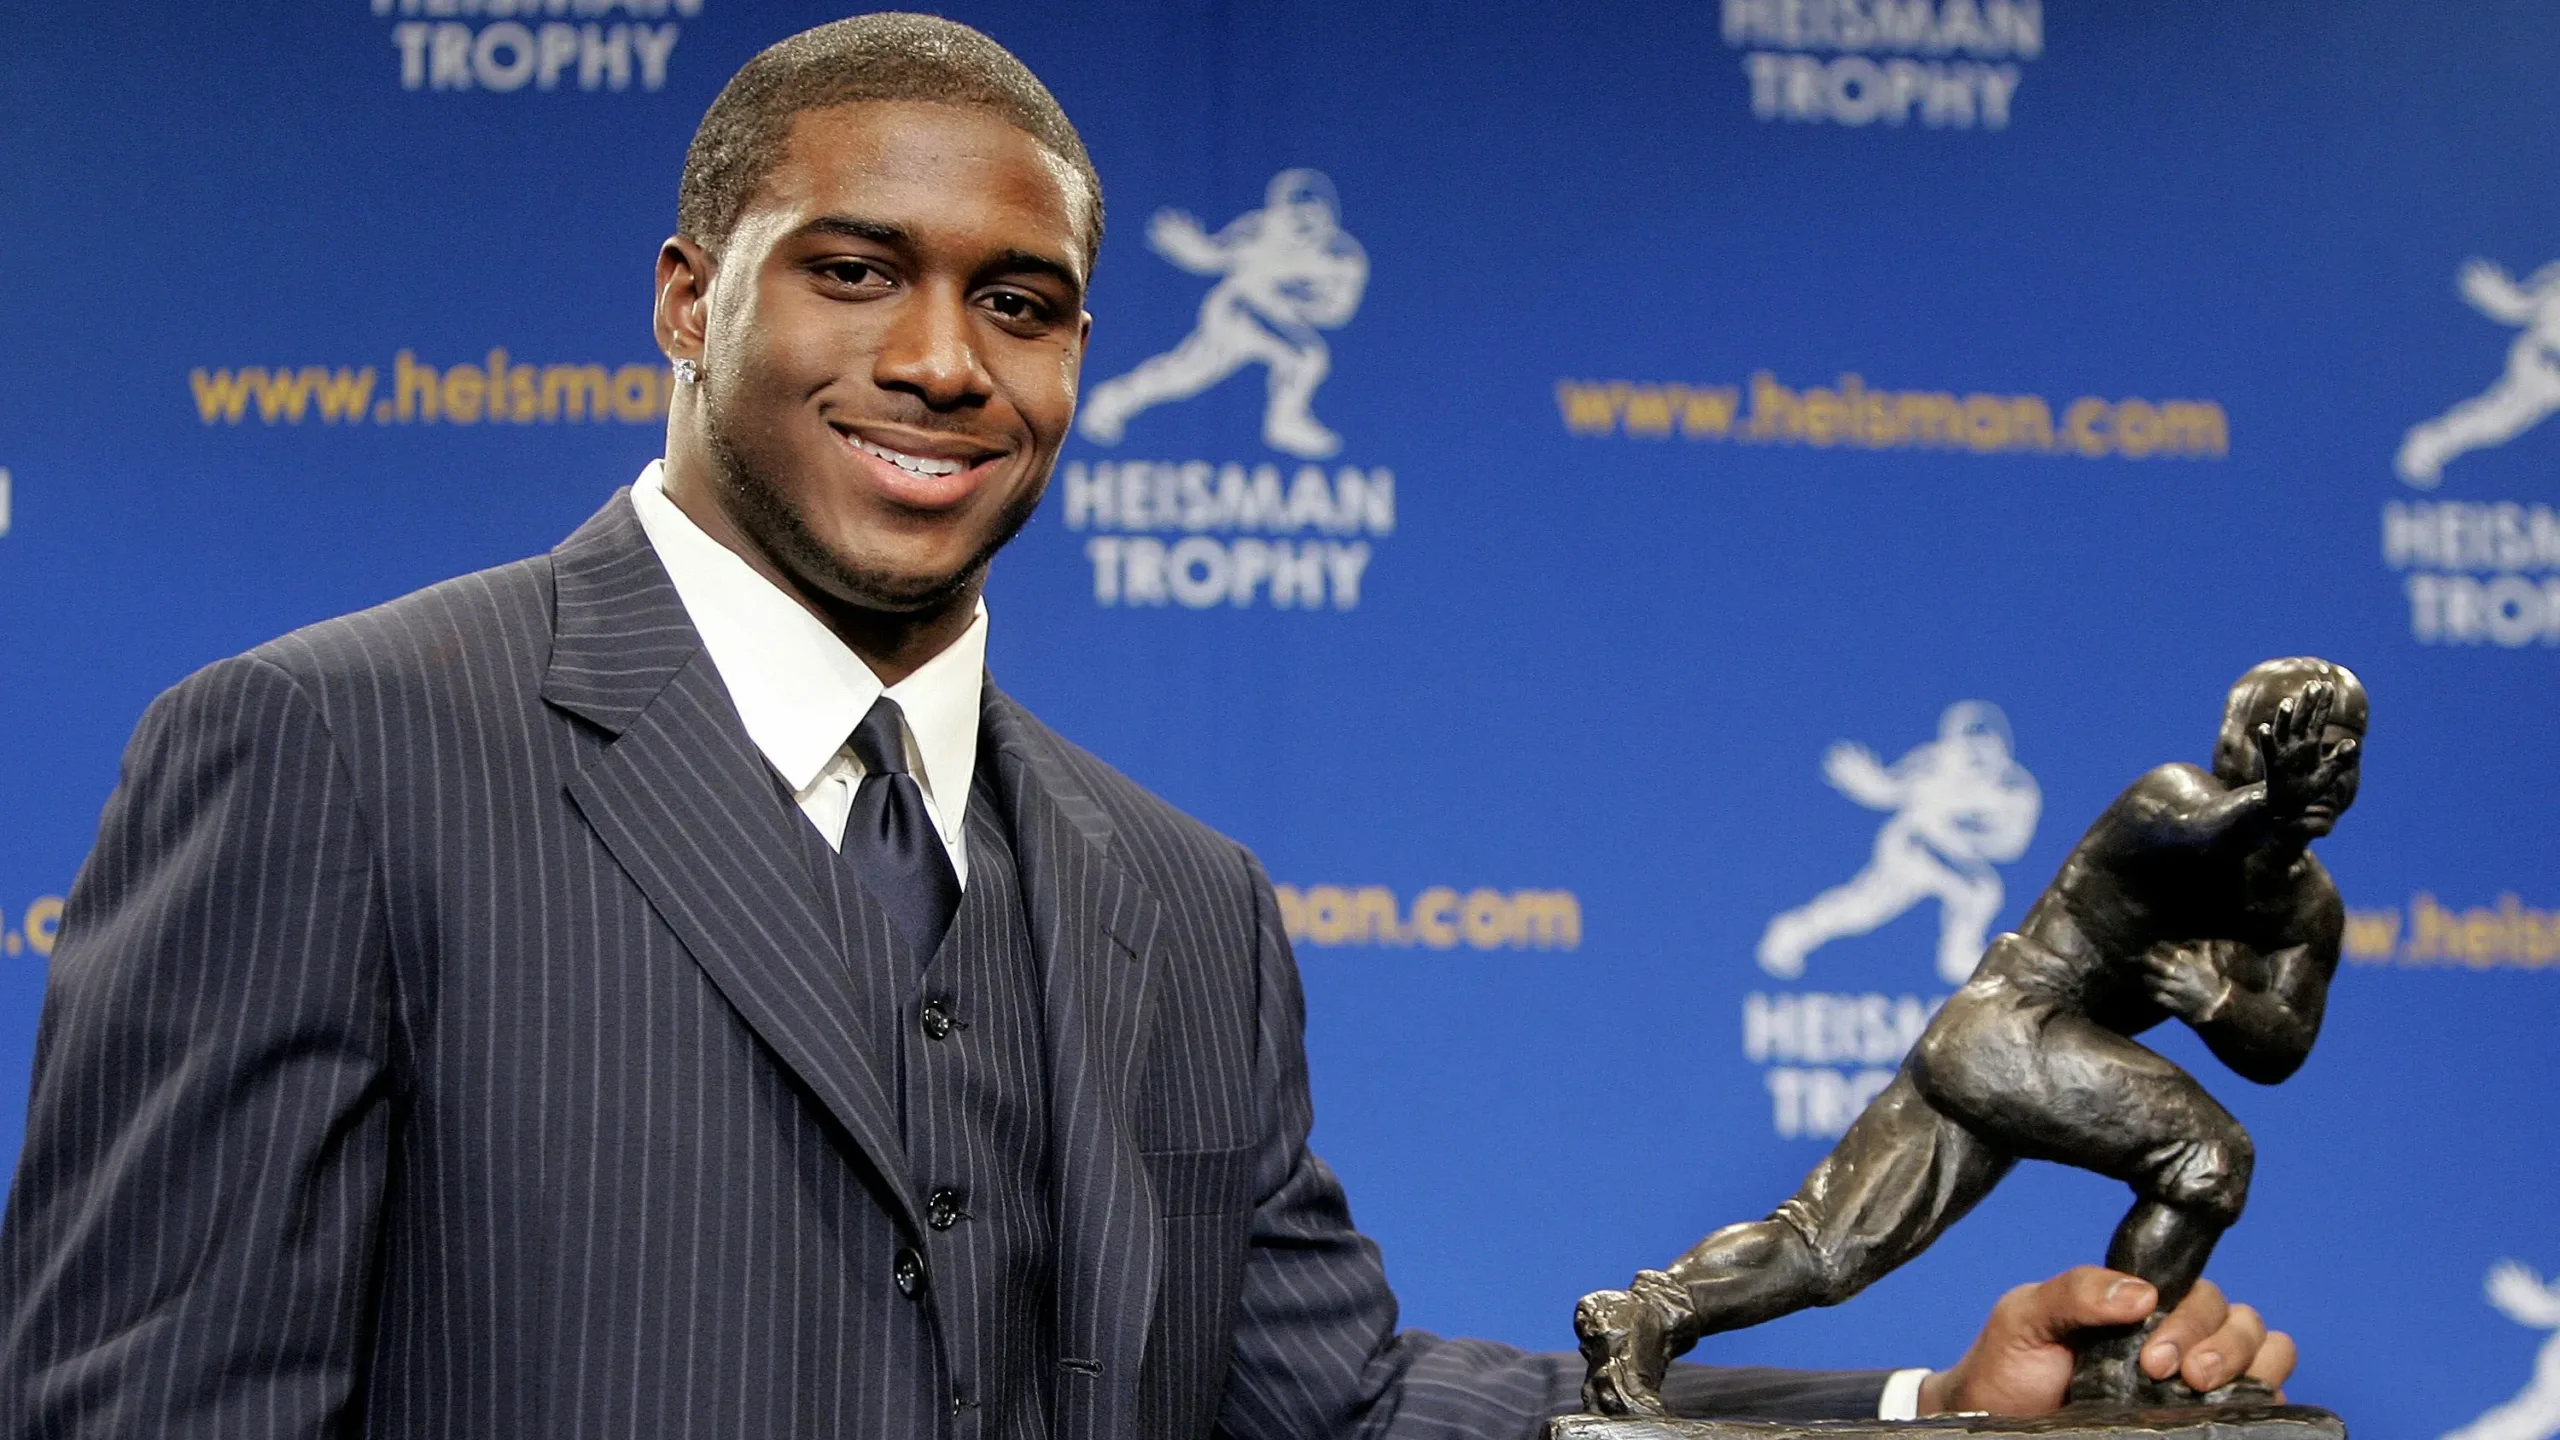 Former Southern Cal running back and Heisman Trophy winner Reggie Bush and his Heisman have been reunited, 14 years after it was removed from him, and the university, for NCAA violations. (Photo courtesy of USATODAY.COM)